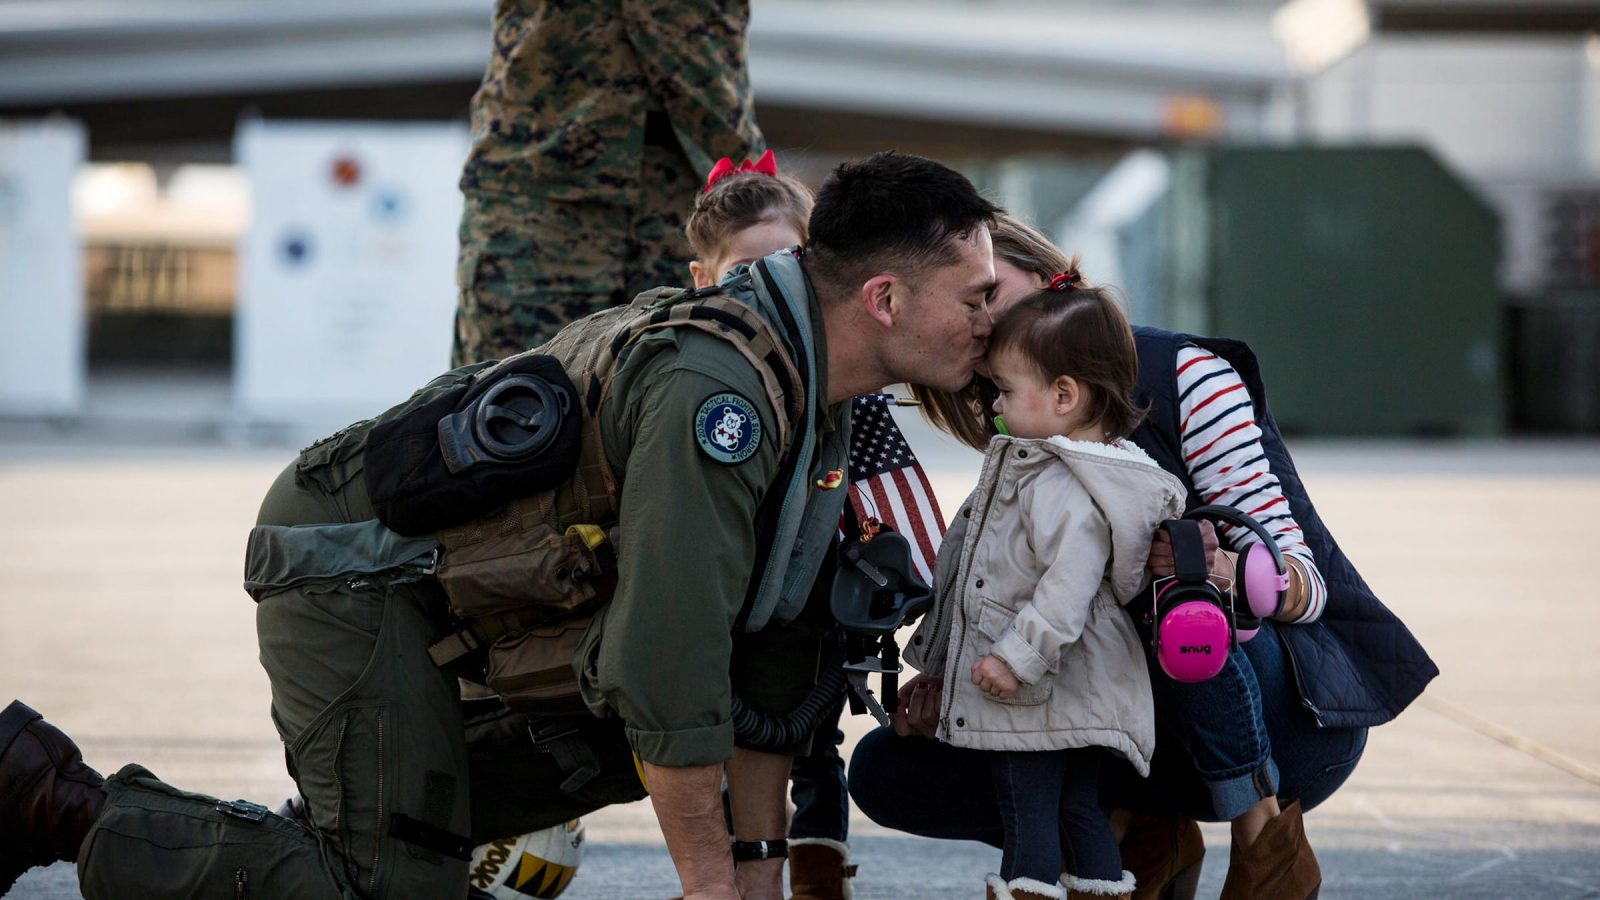 Children of US troops born overseas will no longer get automatic American citizenship